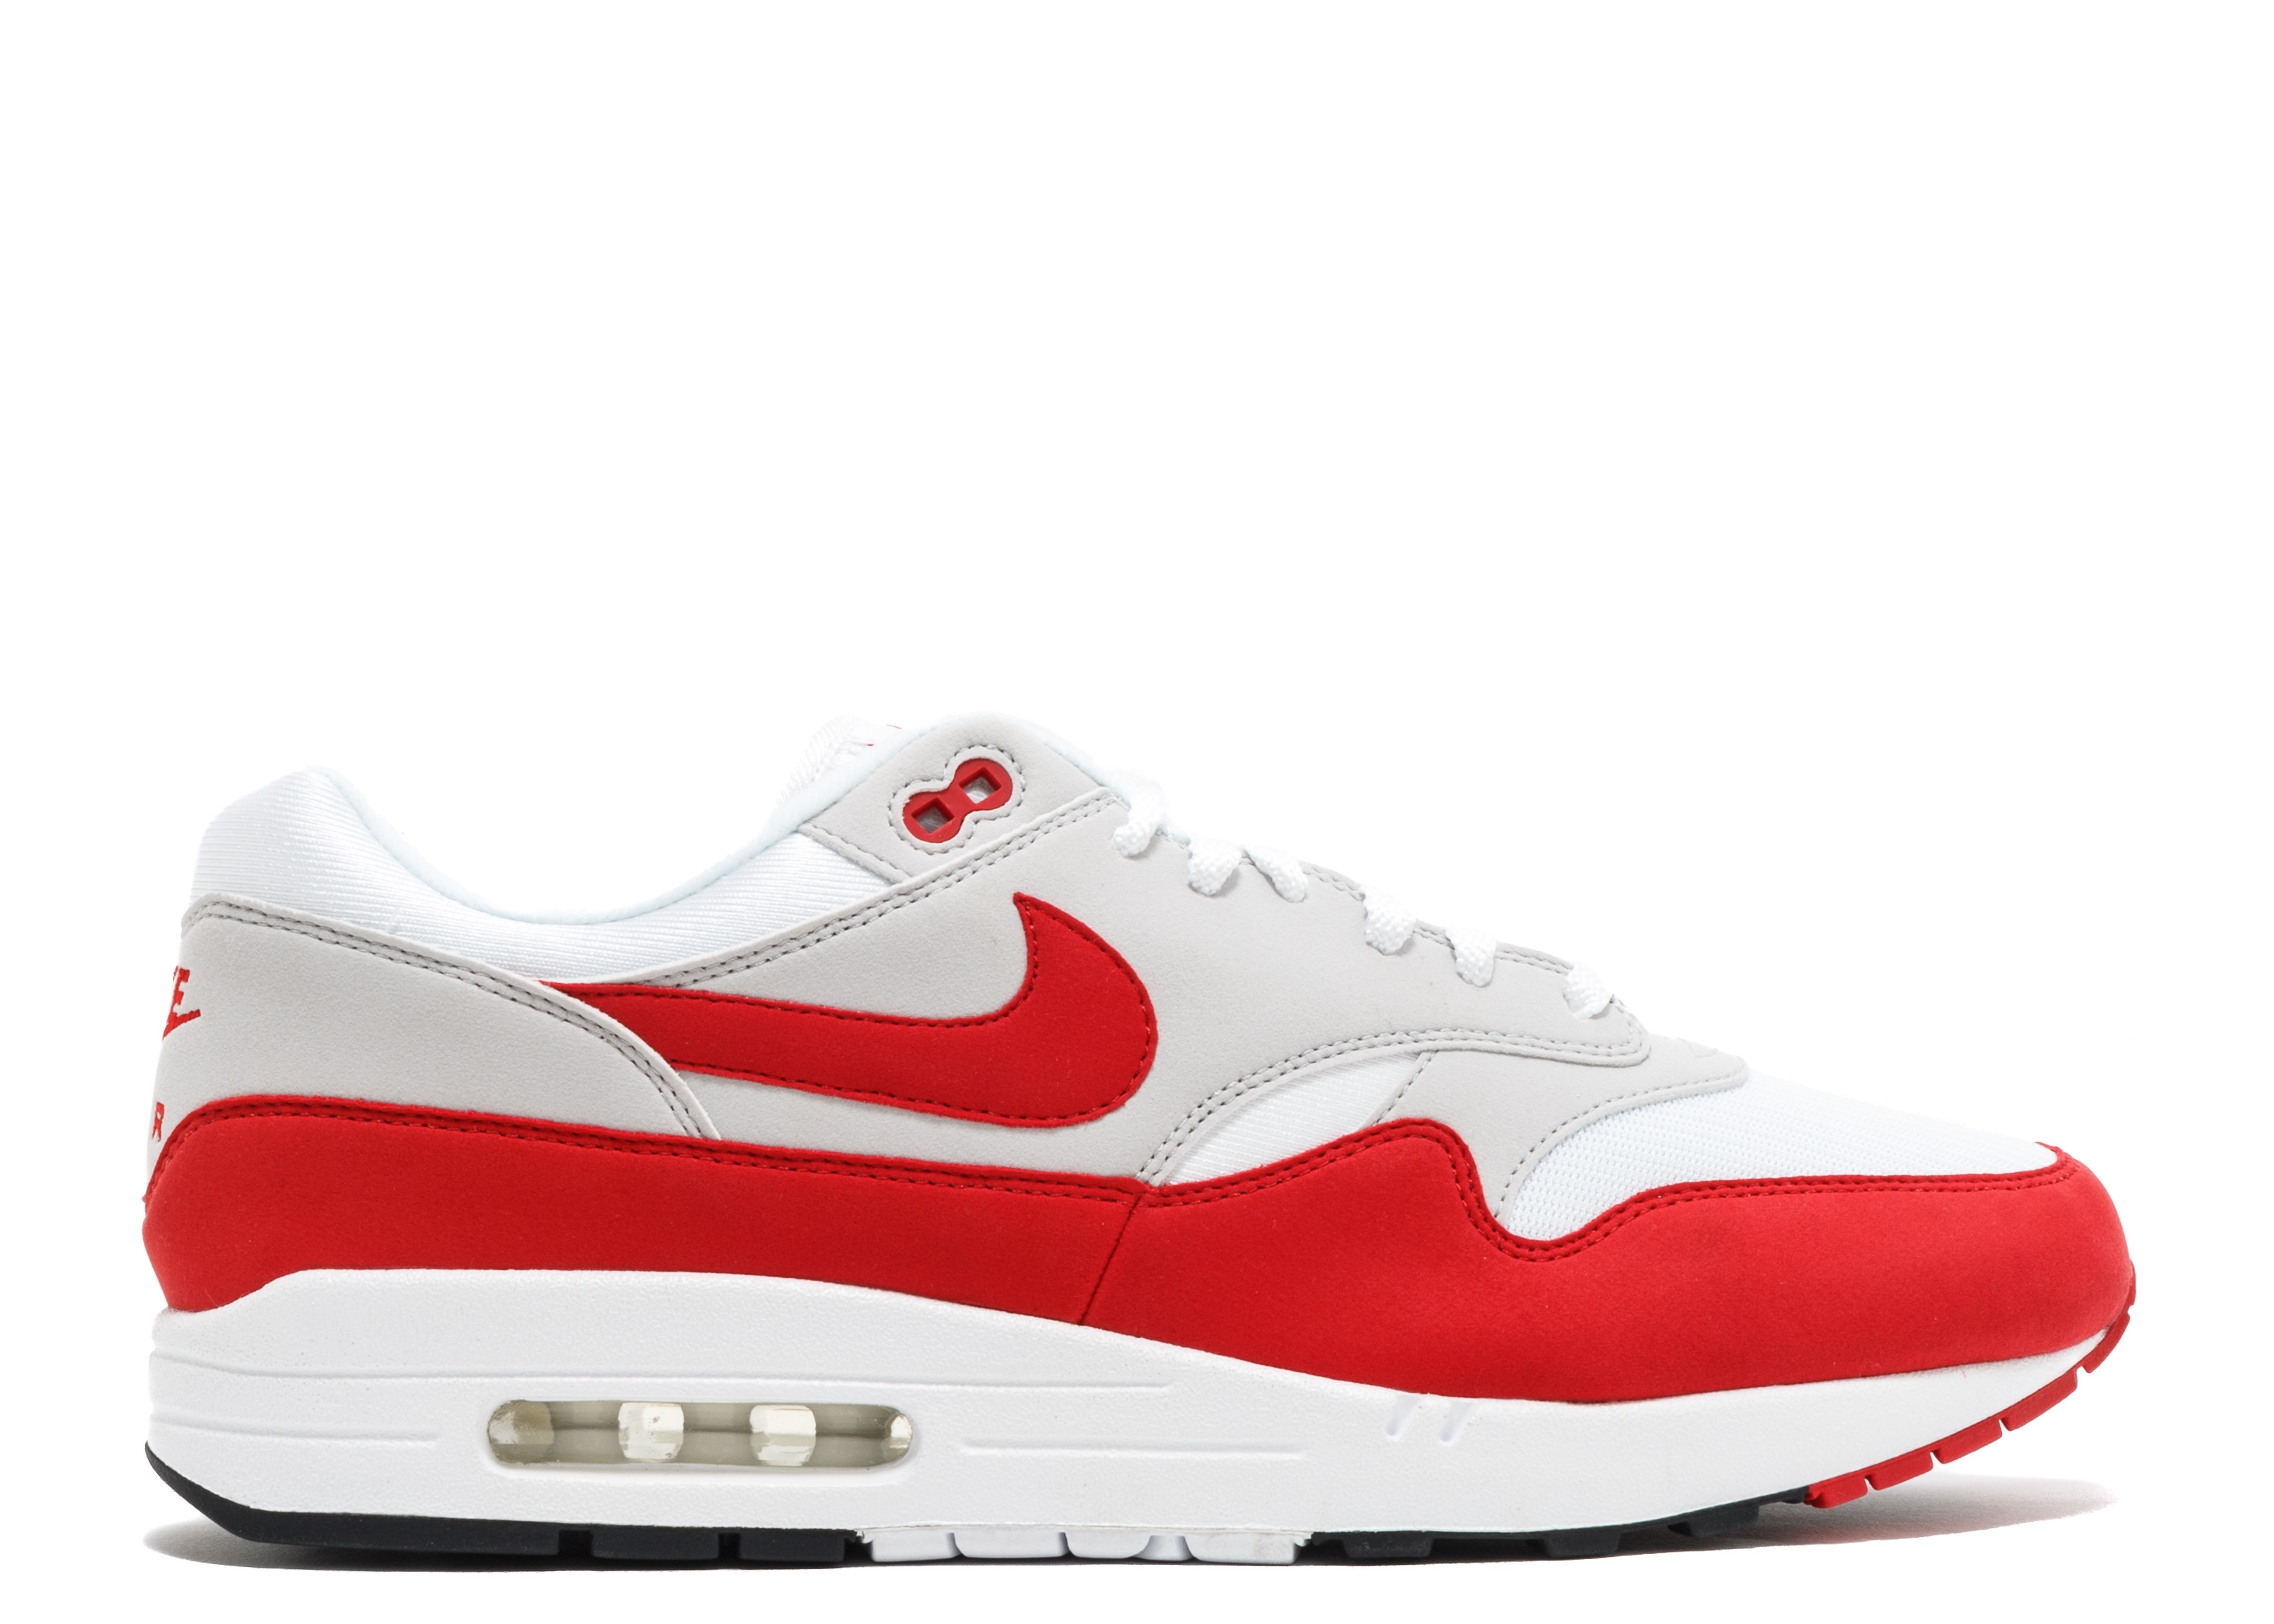 Air Max 1 OG Anniversary 'Red'